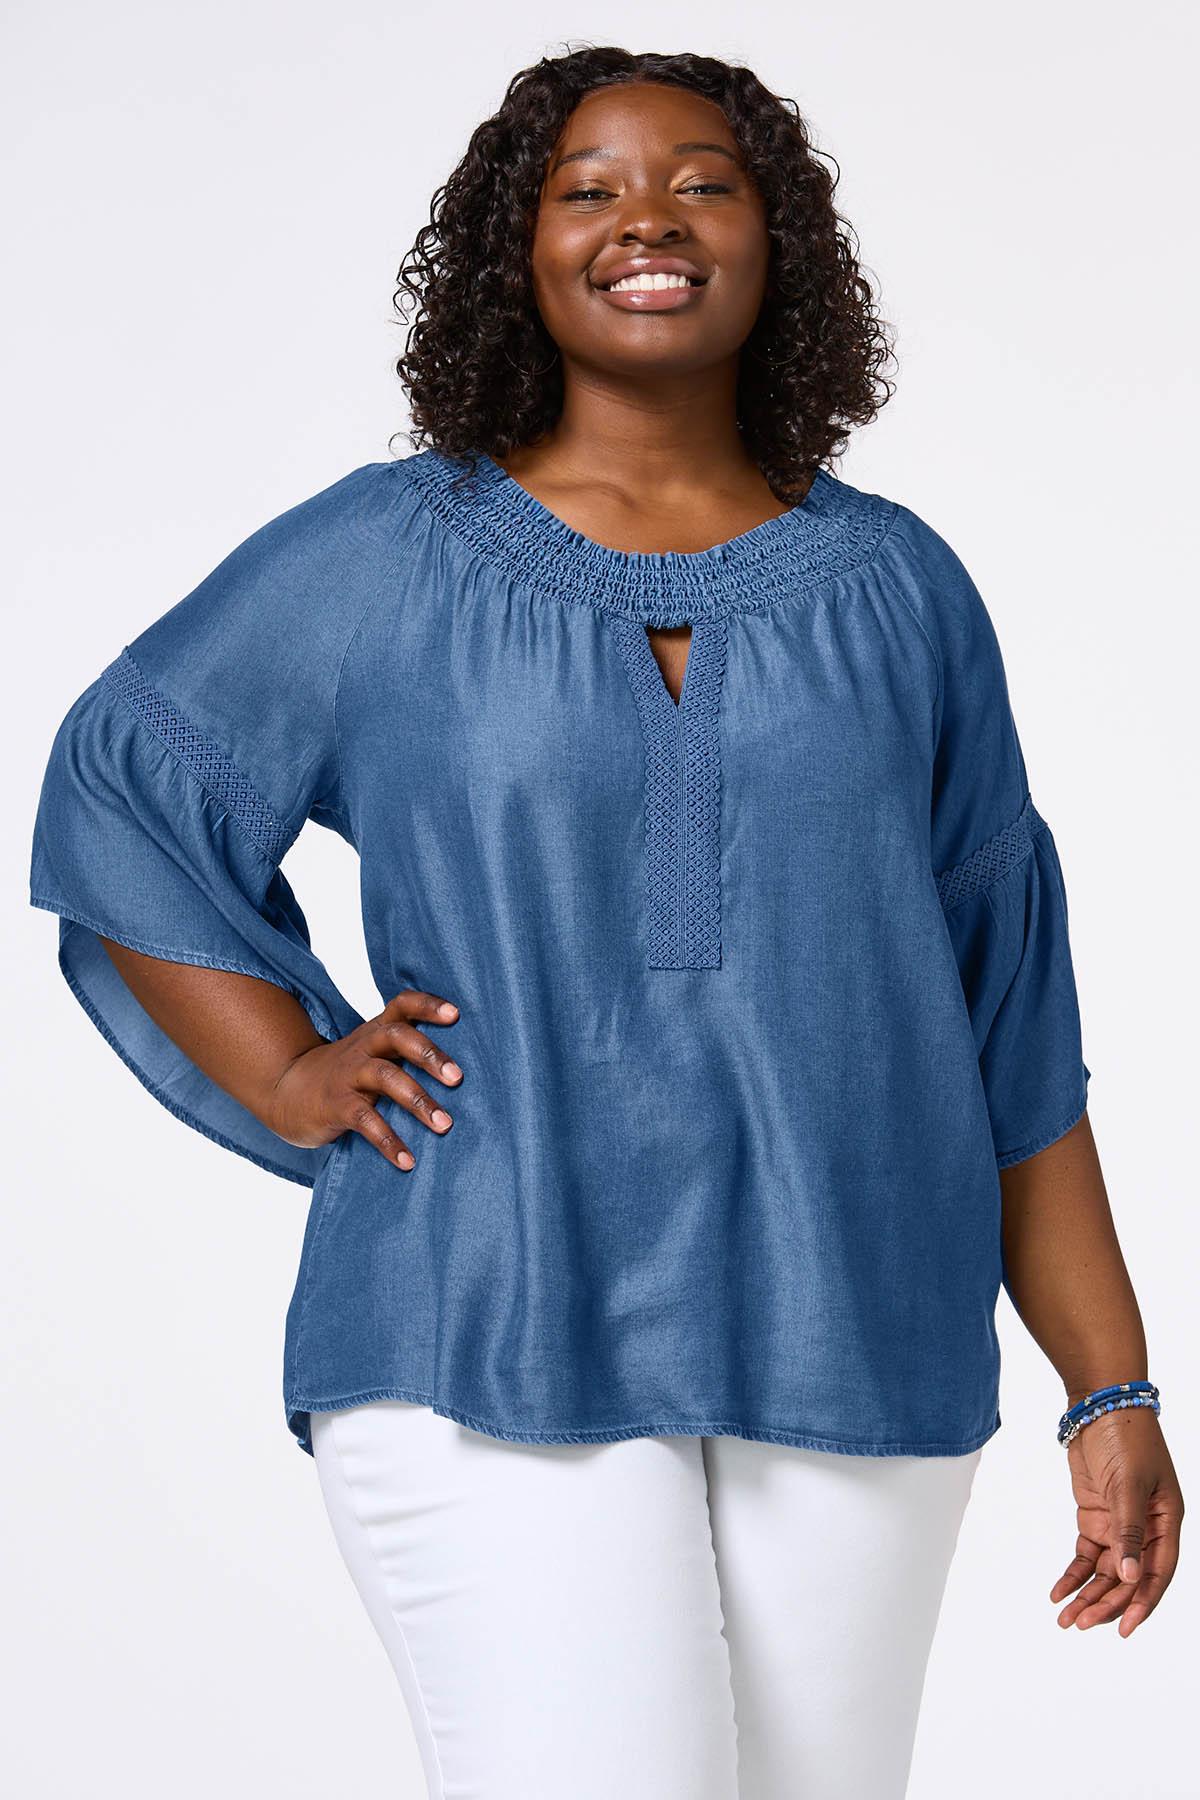 Cato Fashions  Cato Plus Size Chambray Smocked Top